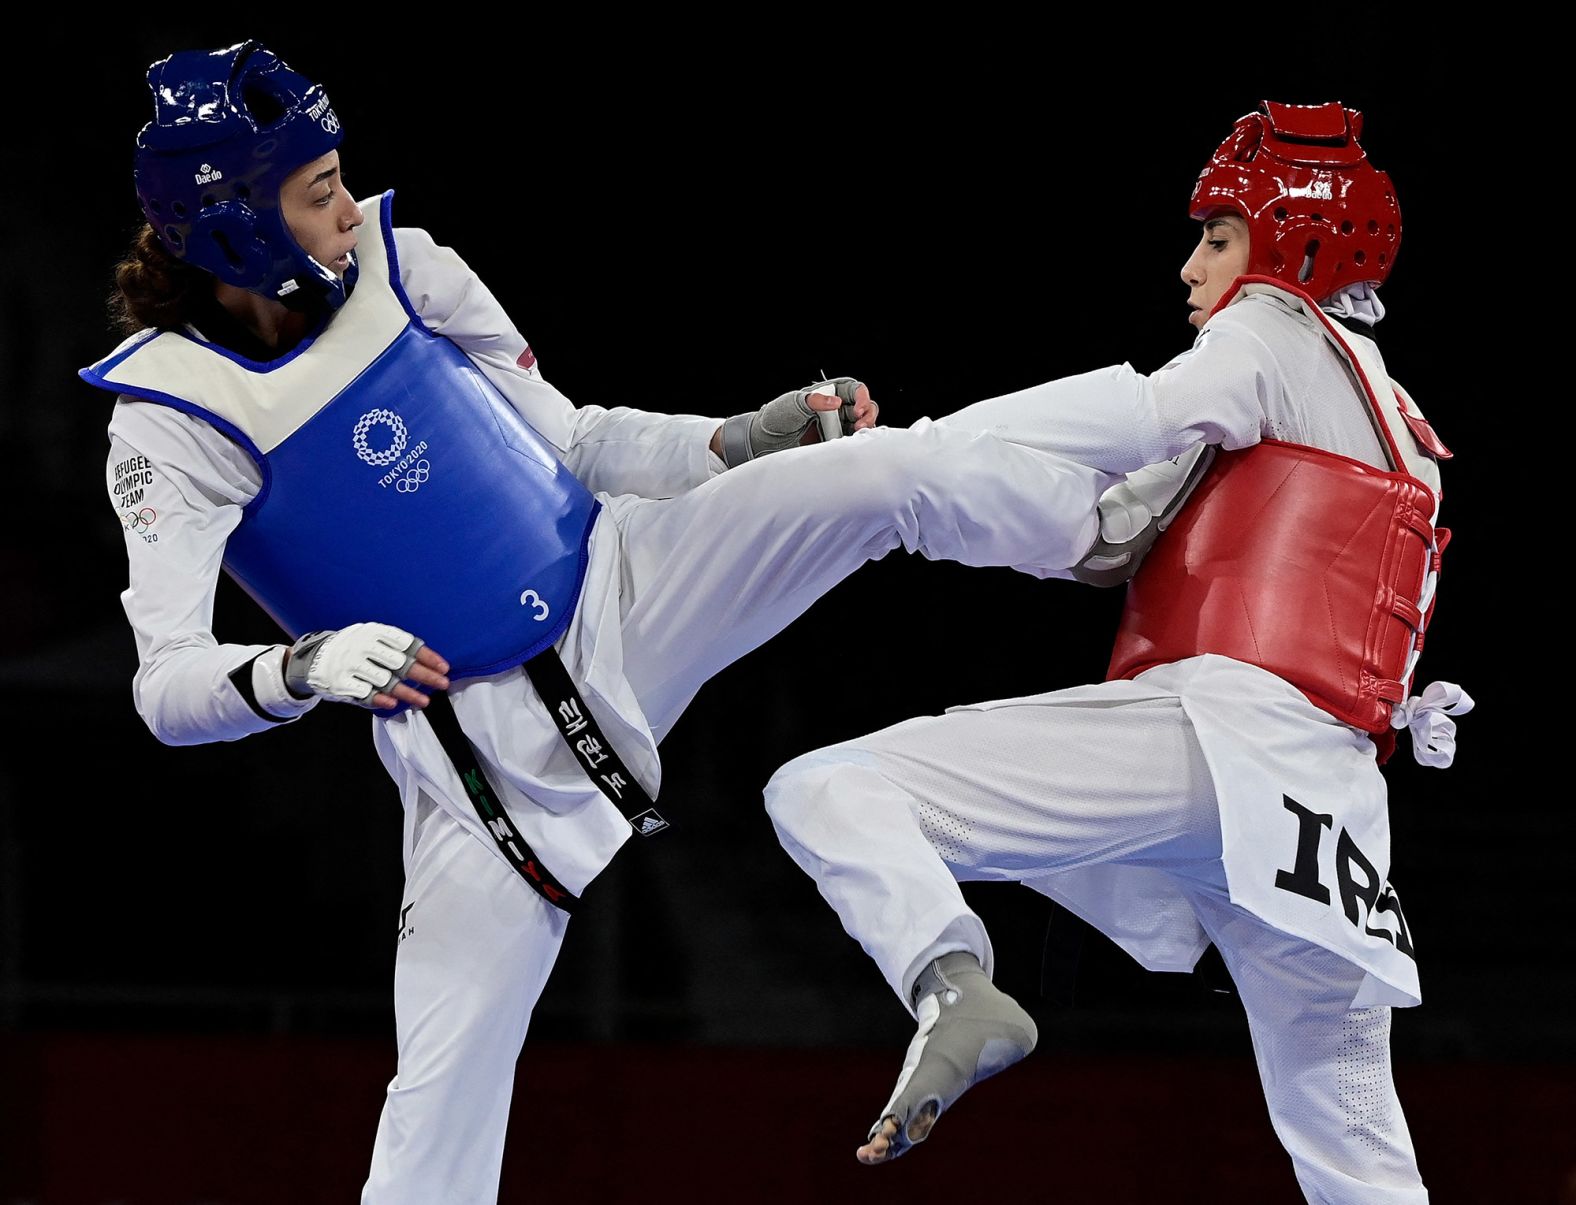 Kimia Alizadeh, a taekwondo athlete representing the Olympic Refugee Team, kicks Iran's Nahid Kiyani Chandeh during her first match on July 25. Alizadeh was born in Iran and became the country's first female athlete to win an Olympic medal when she won bronze at the 2016 Games. But <a href="index.php?page=&url=https%3A%2F%2Fedition.cnn.com%2F2021%2F03%2F03%2Fsport%2Fkimia-alizadeh-tokyo-olympics-iran-white-flag-refugee-spt-intl%2Findex.html" target="_blank">she defected last year</a> amid searing criticism of the regime in Tehran. Alizadeh defeated Chandeh 18-9.